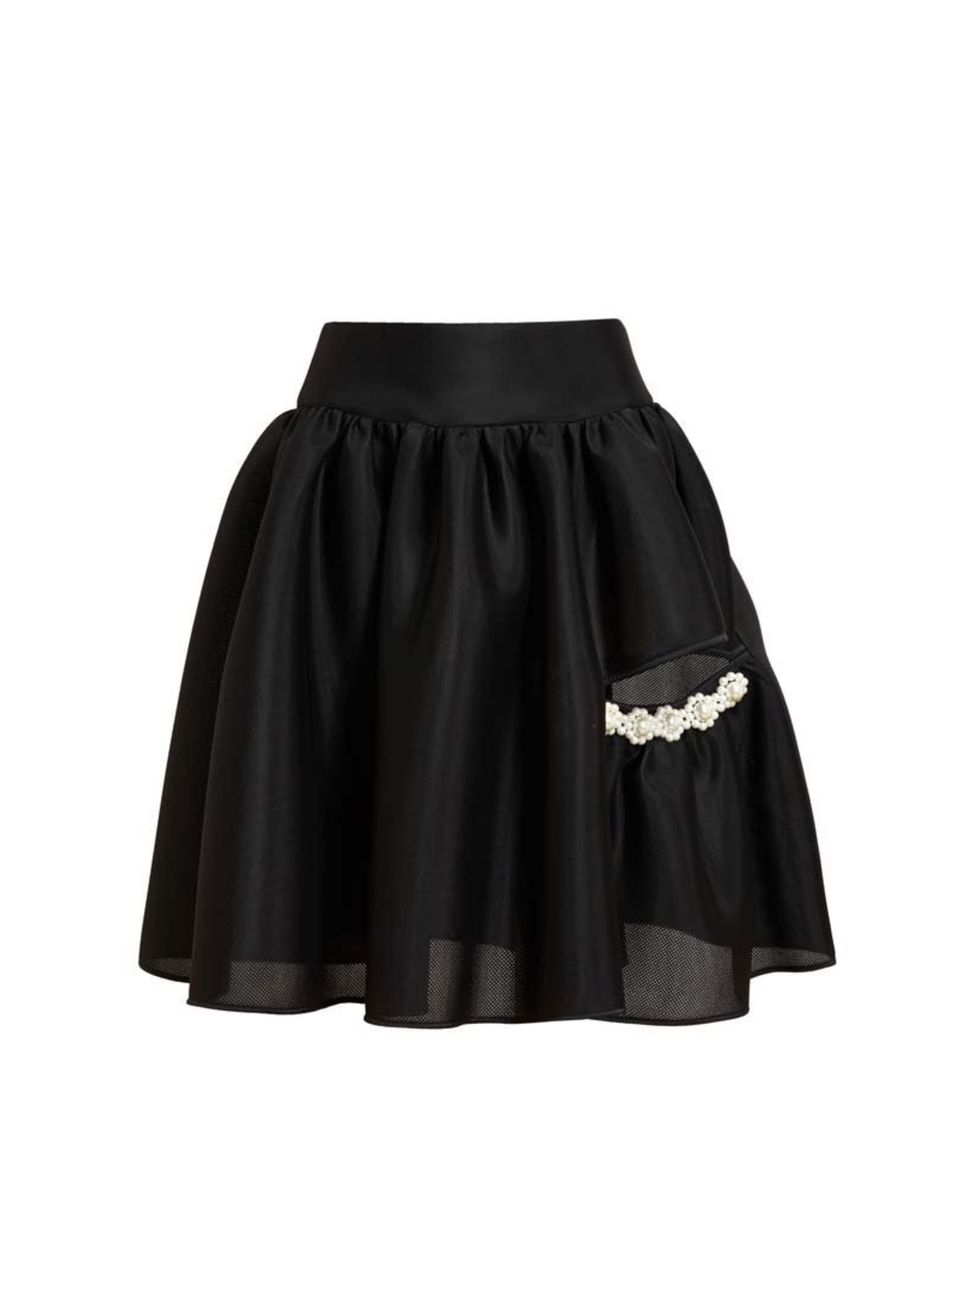 <p>Fashion Director Anne-Marie Curtis chose...</p><p>Simone Rocha skirt, was £540 now £325 at <a href="http://www.brownsfashion.com/product/038S20740002/027/coated-mesh-embellished-skirt">Browns</a></p>